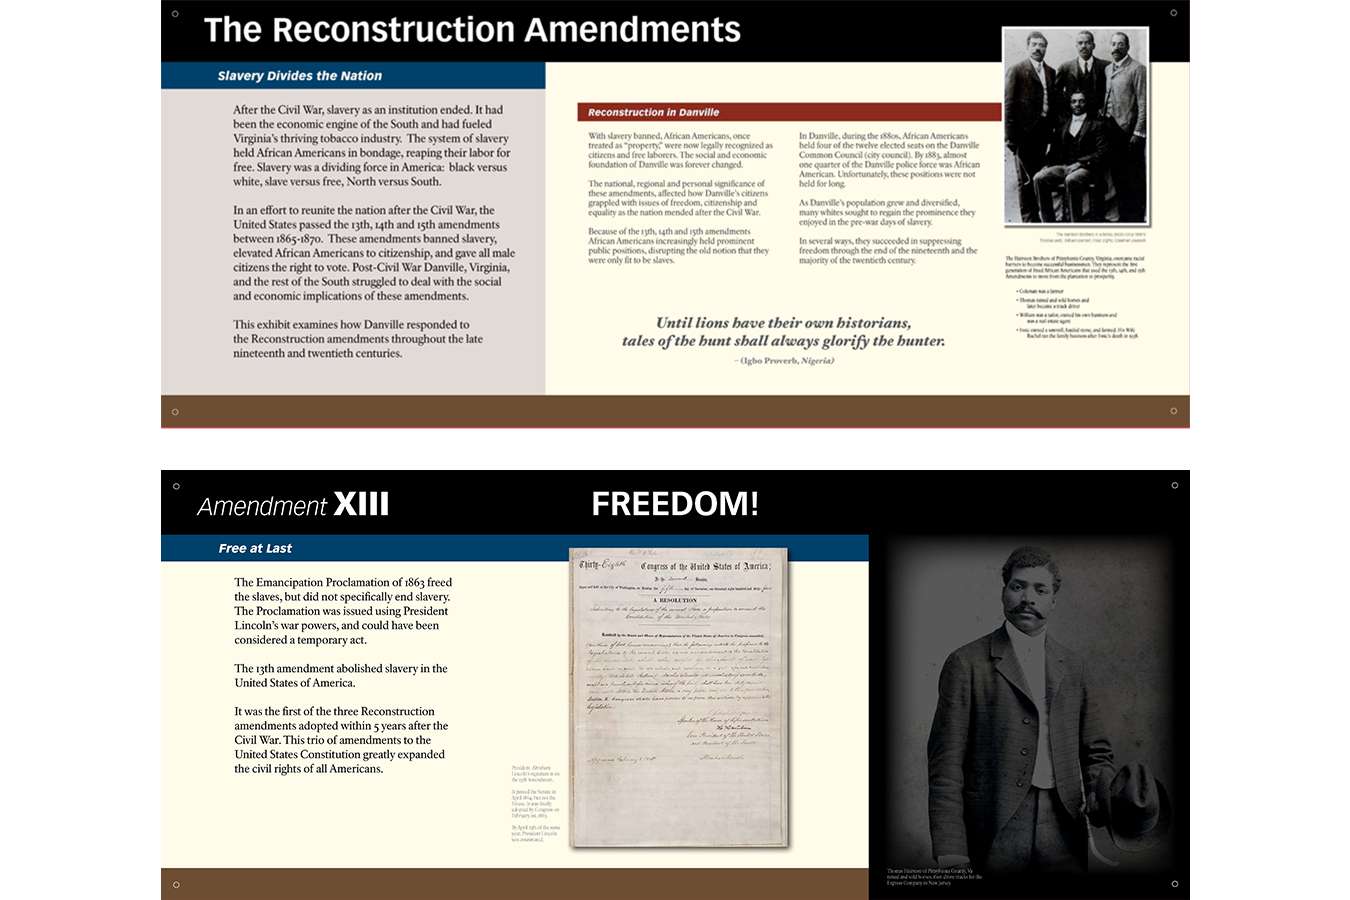 DMFAH 1,2 : Reconstruction Amendments, Jim Crow and Civil Rights are explored in this exhibit